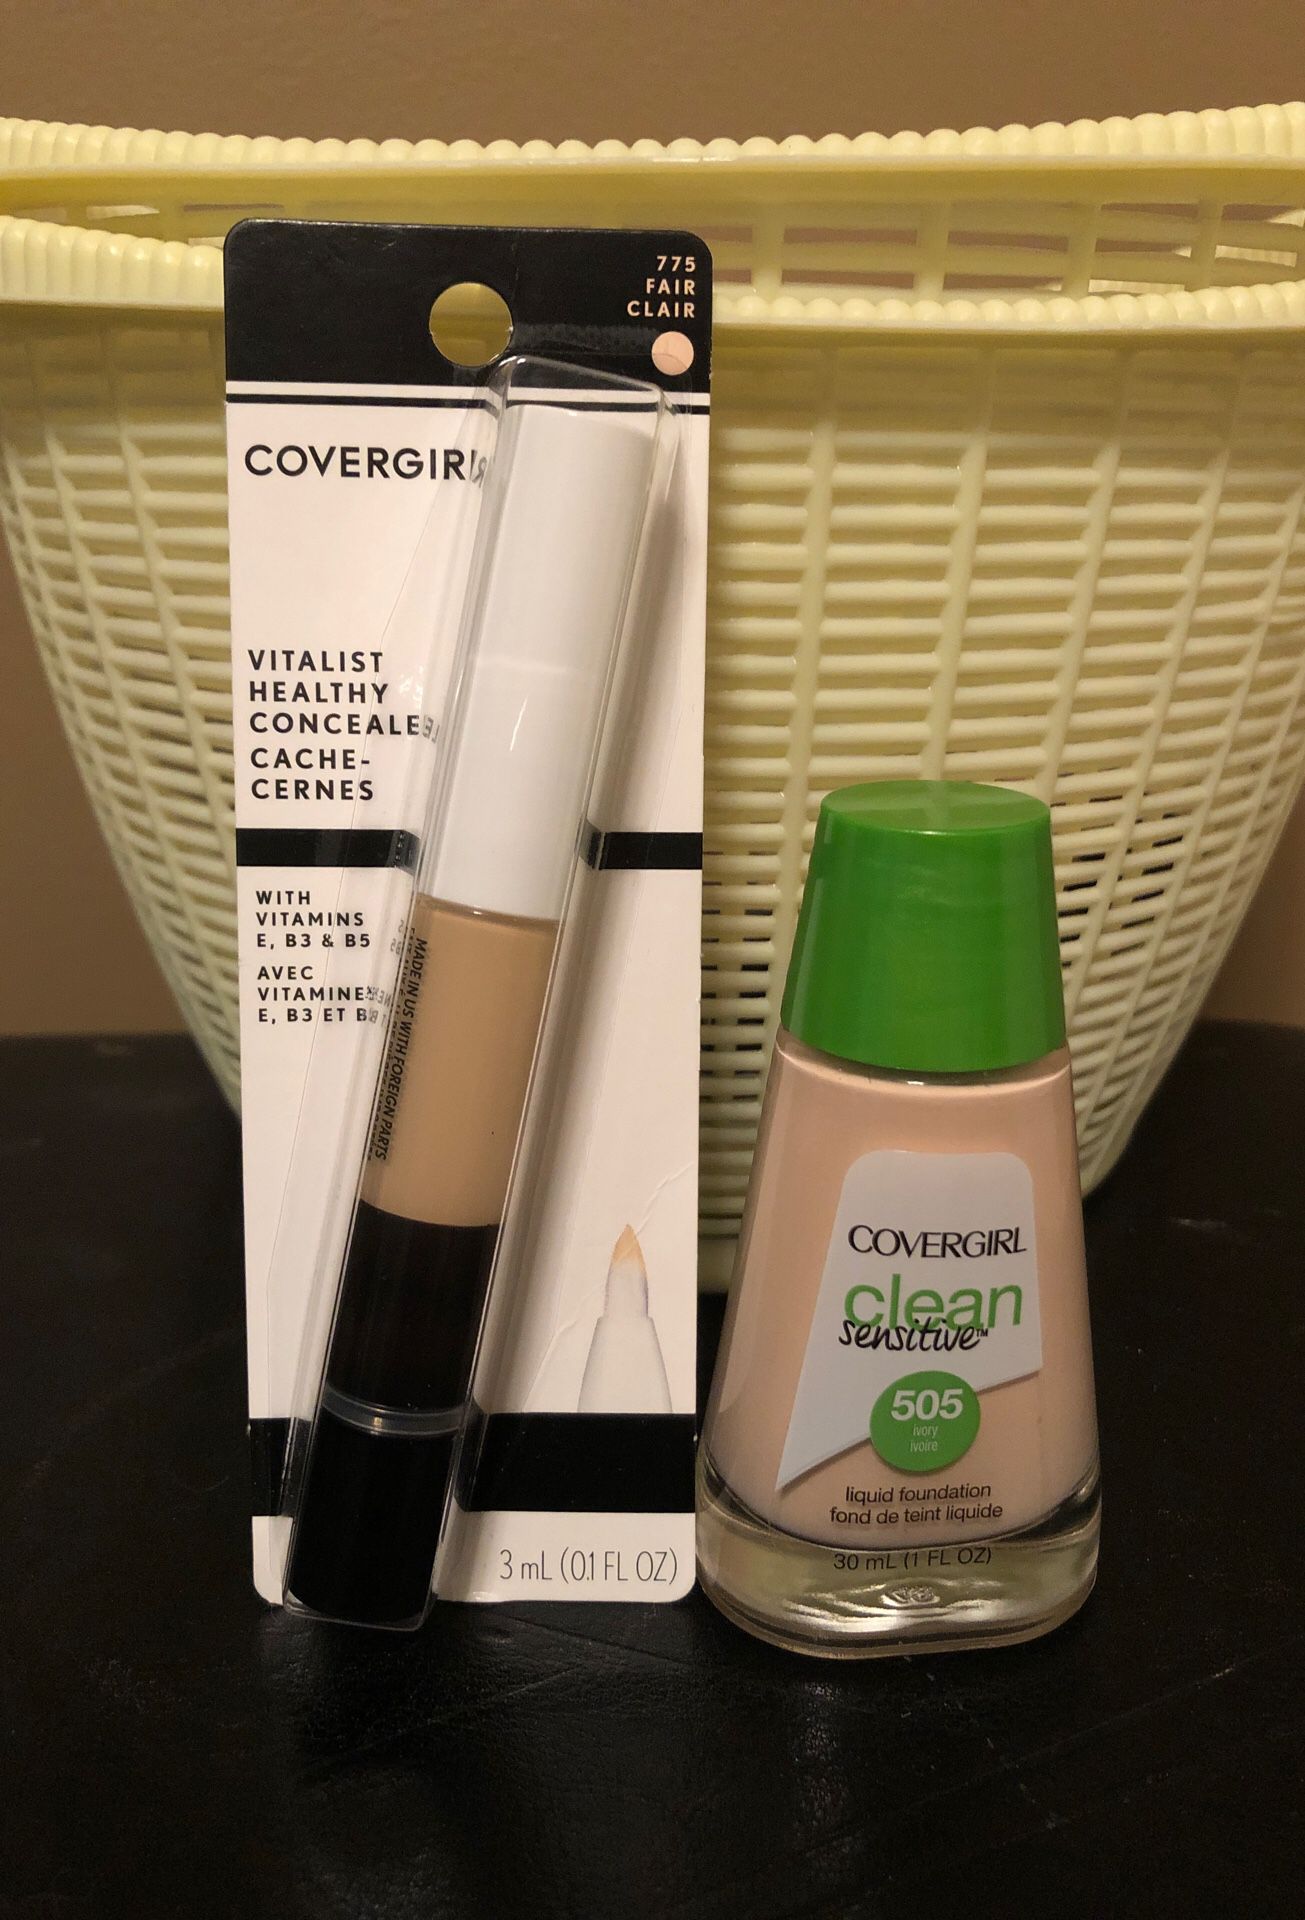 Covergirl ivory foundation and fair concealer